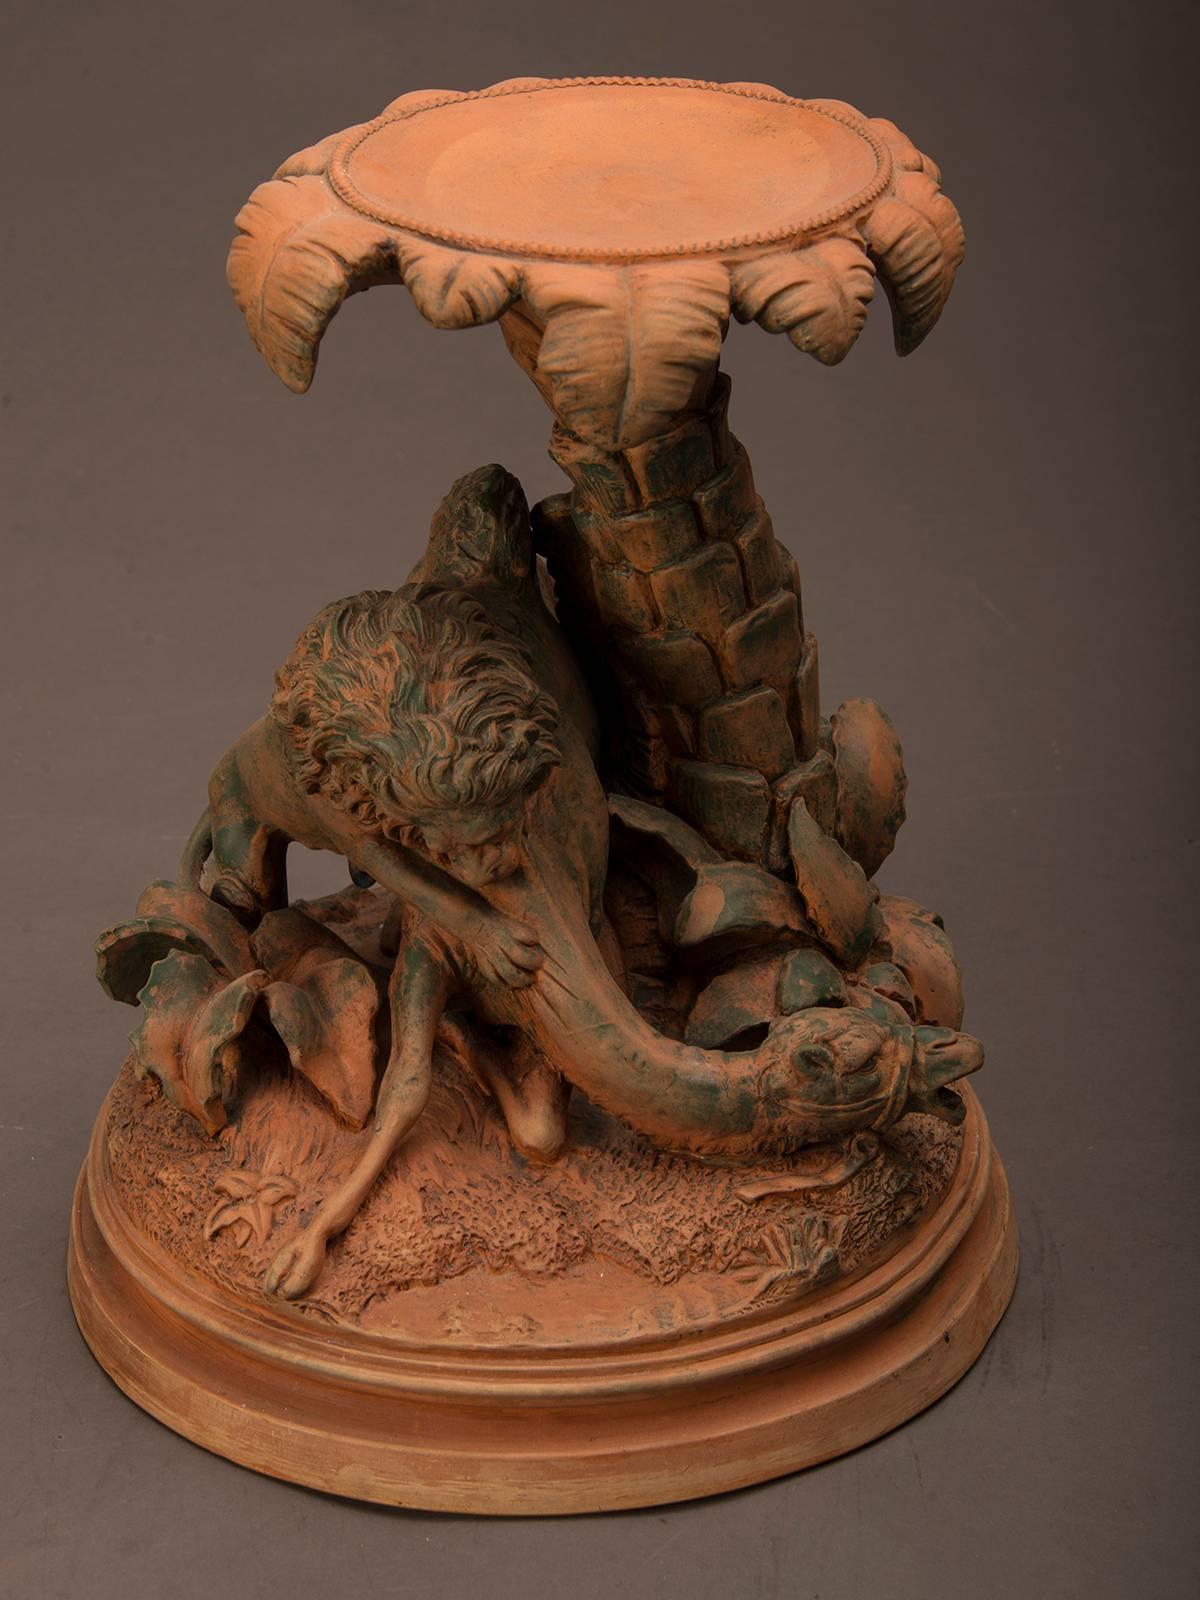 An antique French terra cotta sculpture featuring a camel and lion in a death duel from France, circa 1900. This ferocious depiction of a desert fight around a palm tree at an oasis is full of immediacy and skillfully conveys the rapidity of